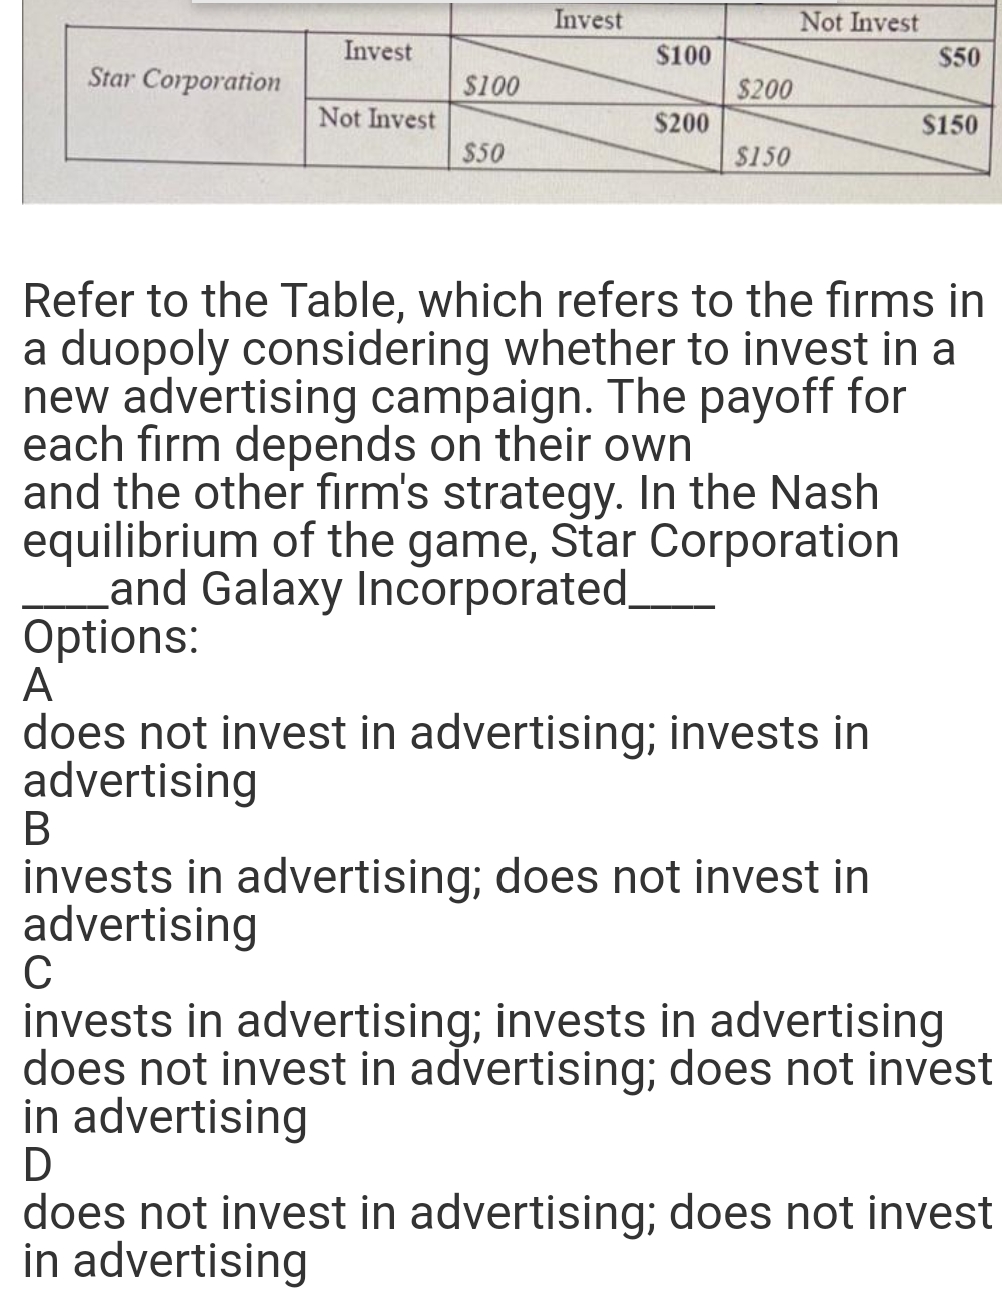 Invest
Not Invest
Invest
$100
$50
Star Corporation
$100
$200
Not Invest
$200
$150
$50
$150
Refer to the Table, which refers to the firms in
a duopoly considering whether to invest in a
new advertising campaign. The payoff for
each firm depends on their own
and the other firm's strategy. In the Nash
equilibrium of the game, Star Corporation
and Galaxy Incorporated
Options:
A
does not invest in advertising; invests in
advertising
B
invests in advertising; does not invest in
advertising
C
invests in advertising; invests in advertising
does not invest in advertising; does not invest
in advertising
D
does not invest in advertising; does not invest
in advertising